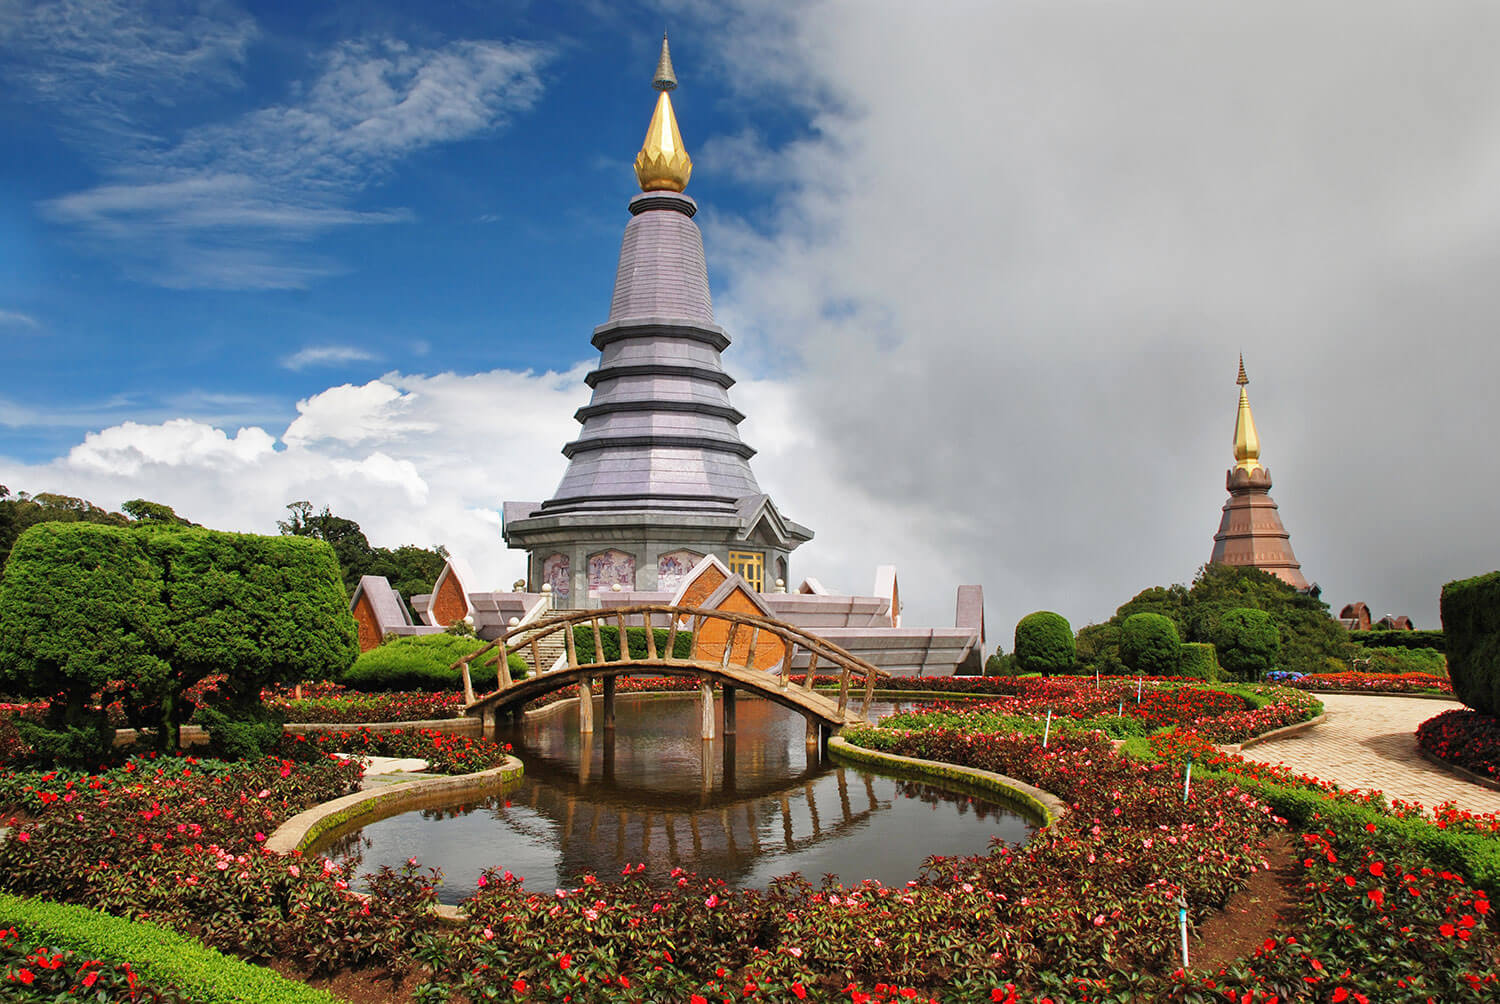 The best tourism spot in Chiang Mai